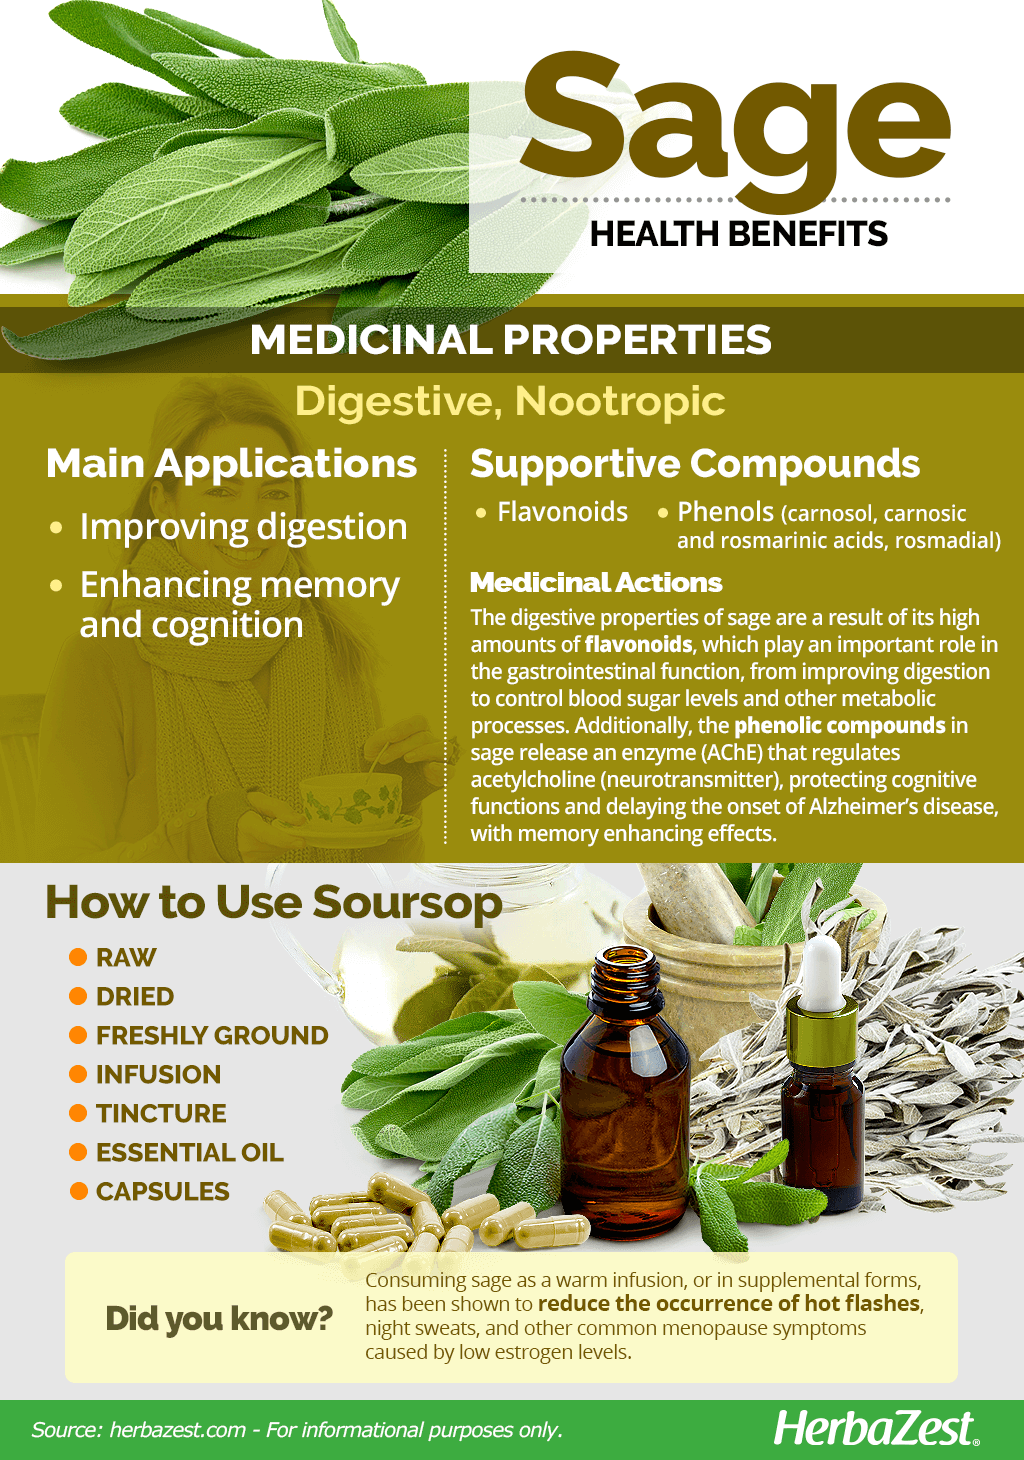 Sage: Health benefits, facts, and research